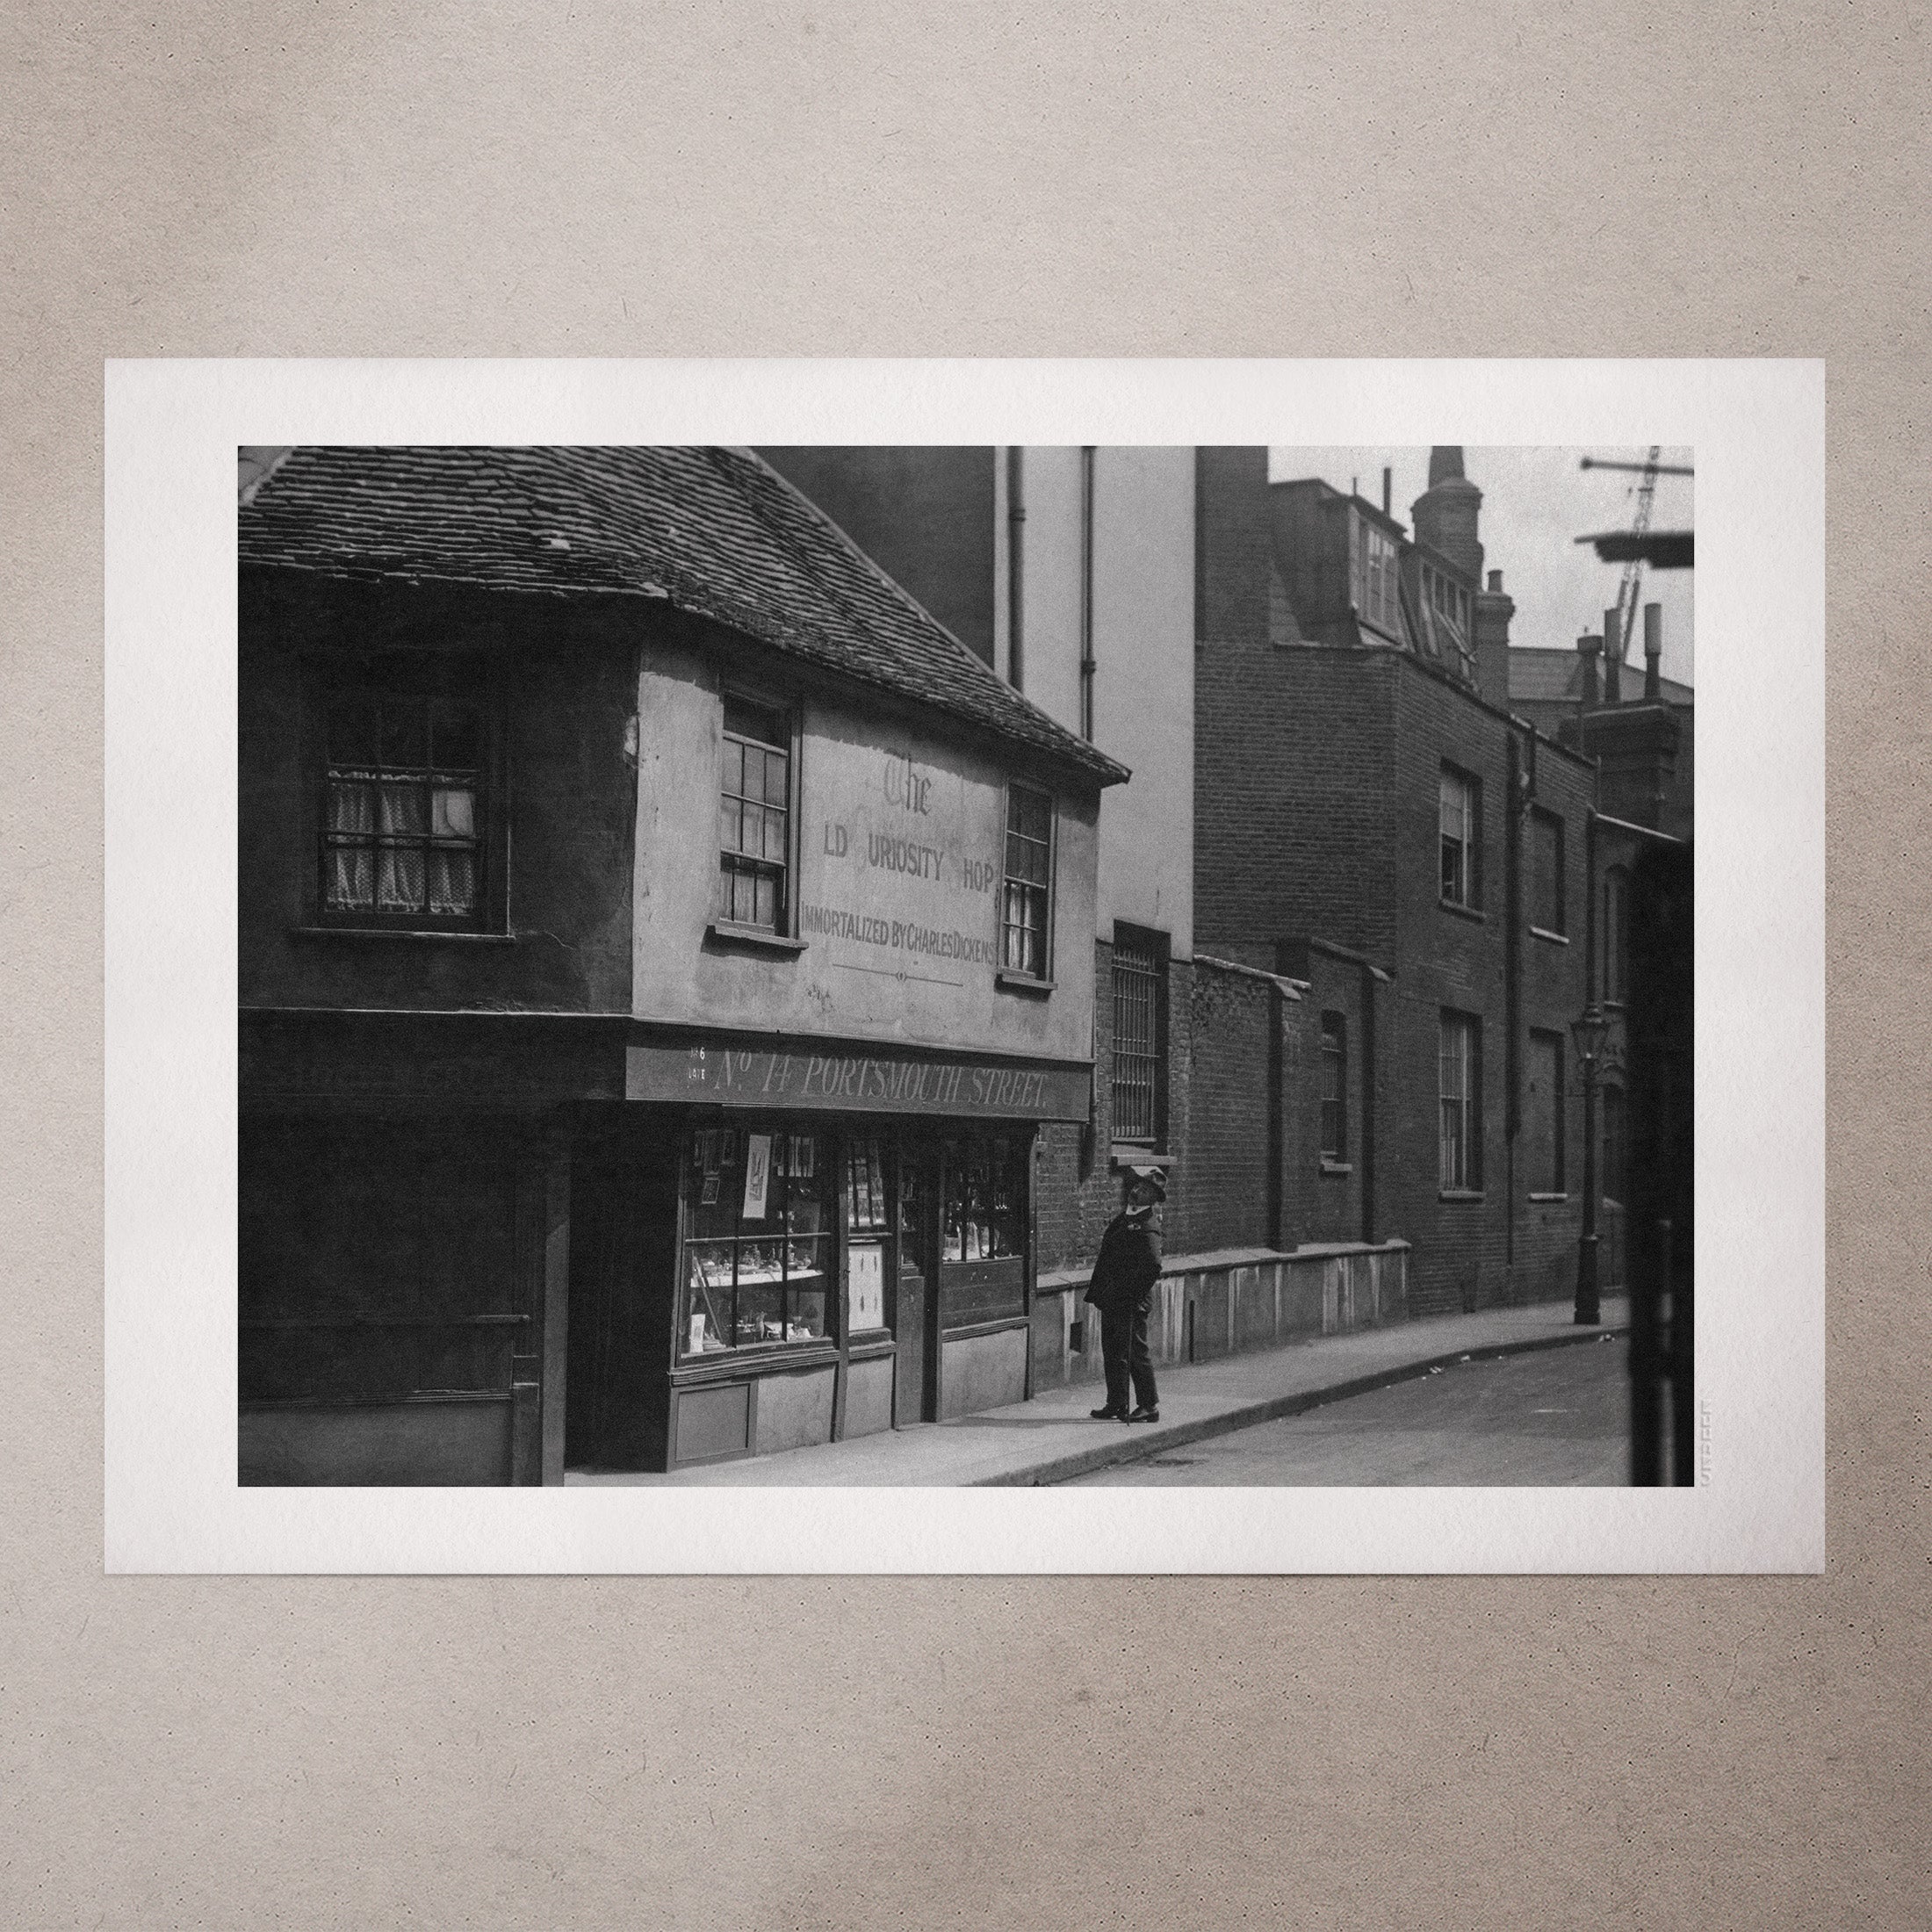 The Old Curiosity Shop by Unknown, c 1920